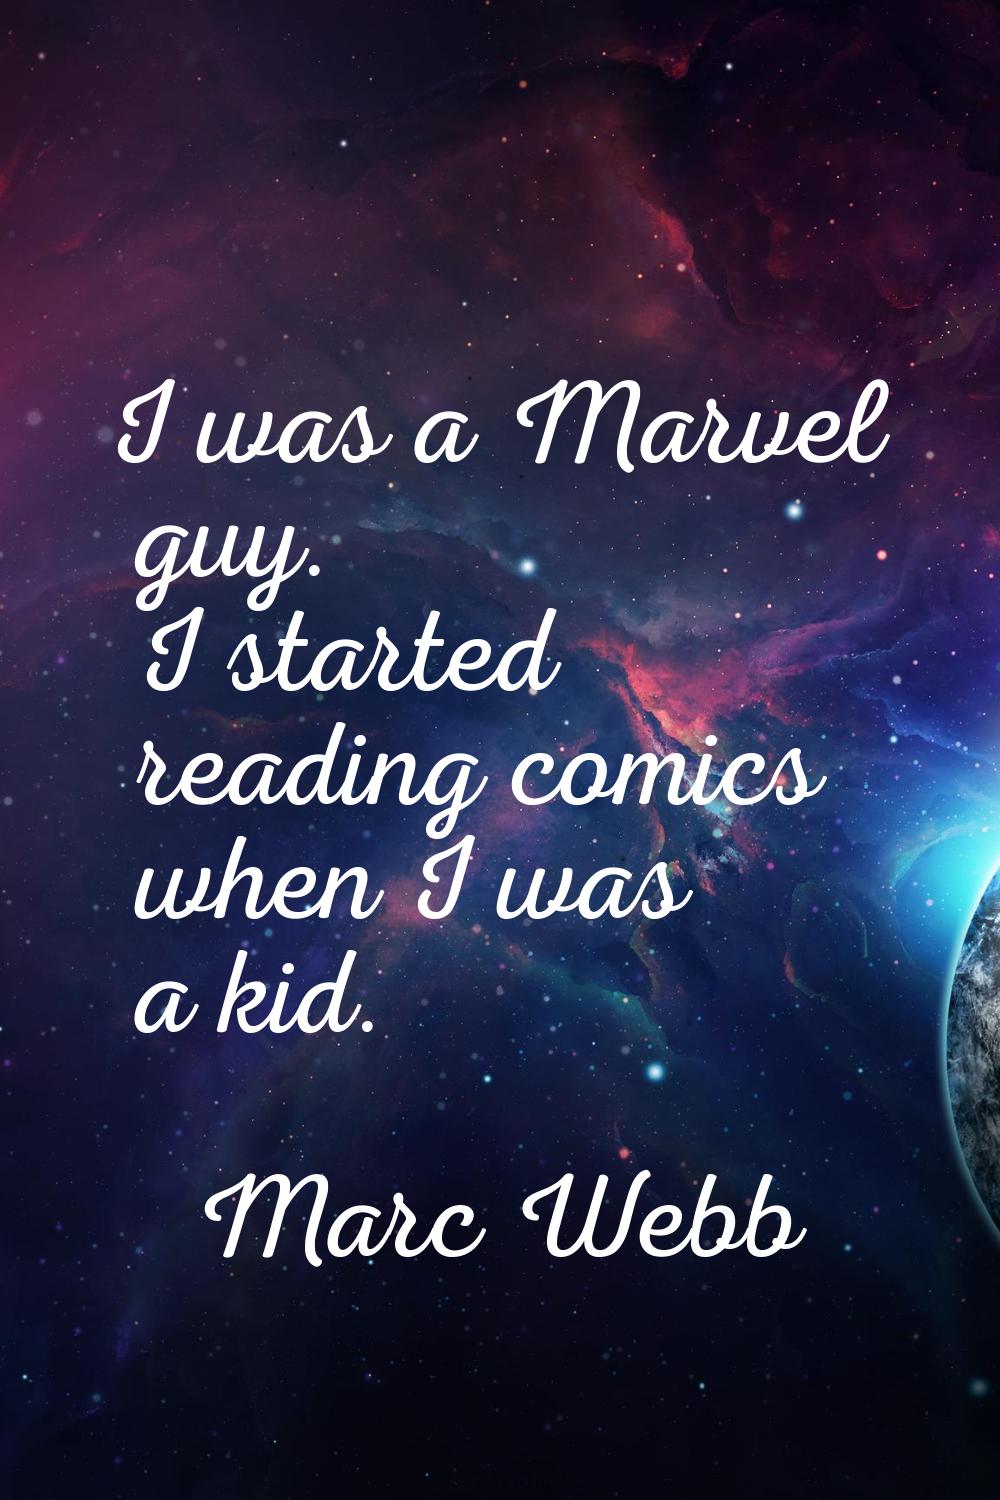 I was a Marvel guy. I started reading comics when I was a kid.